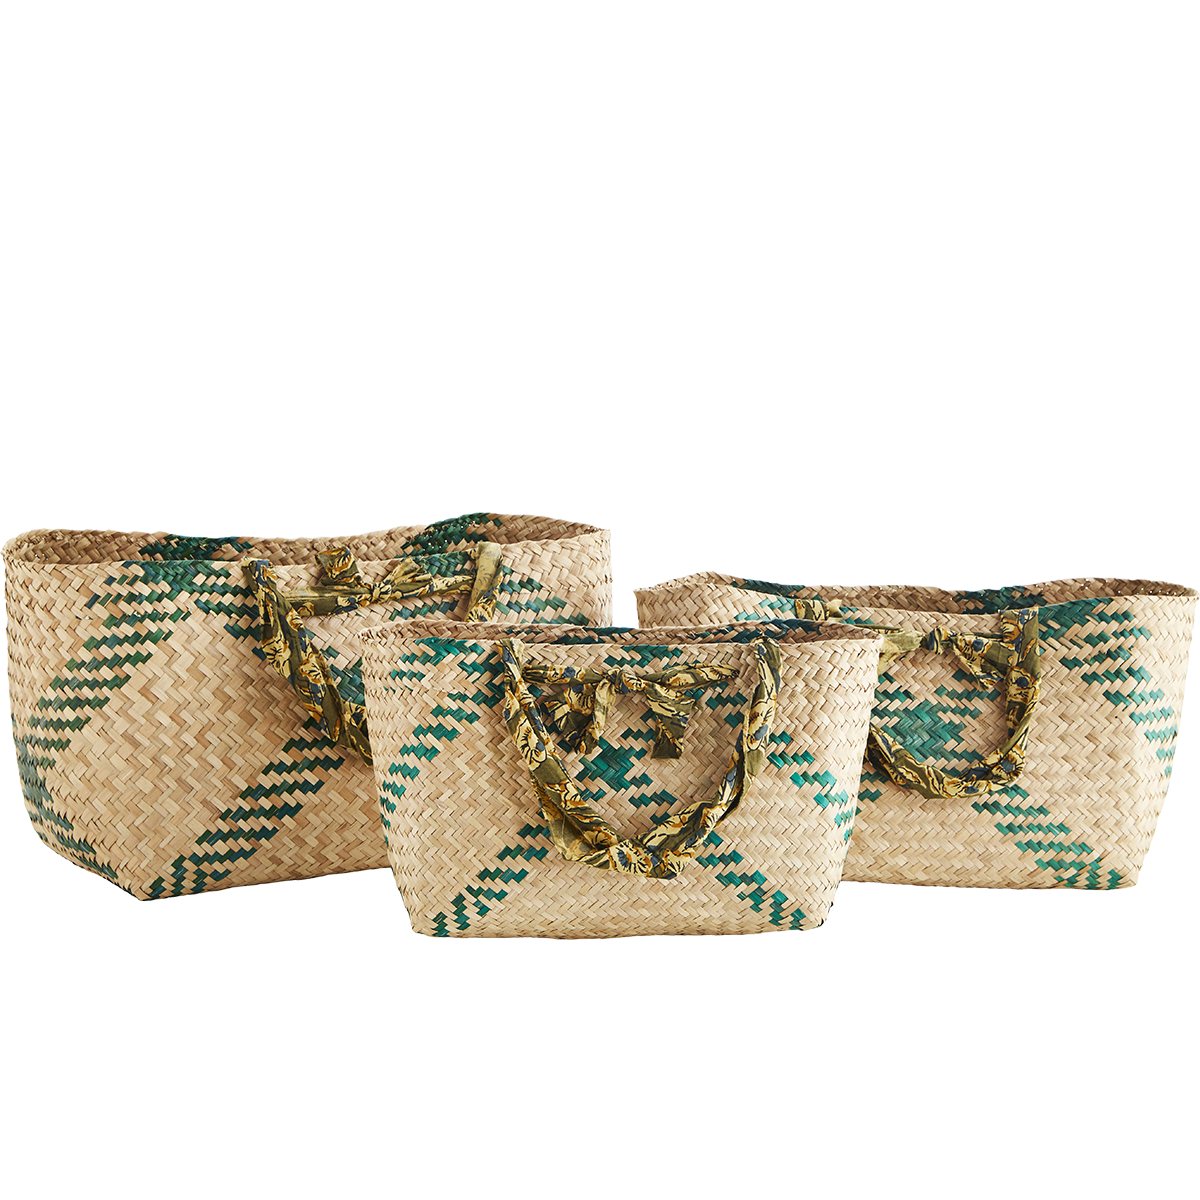 Seagrass bags w/ cotton handles